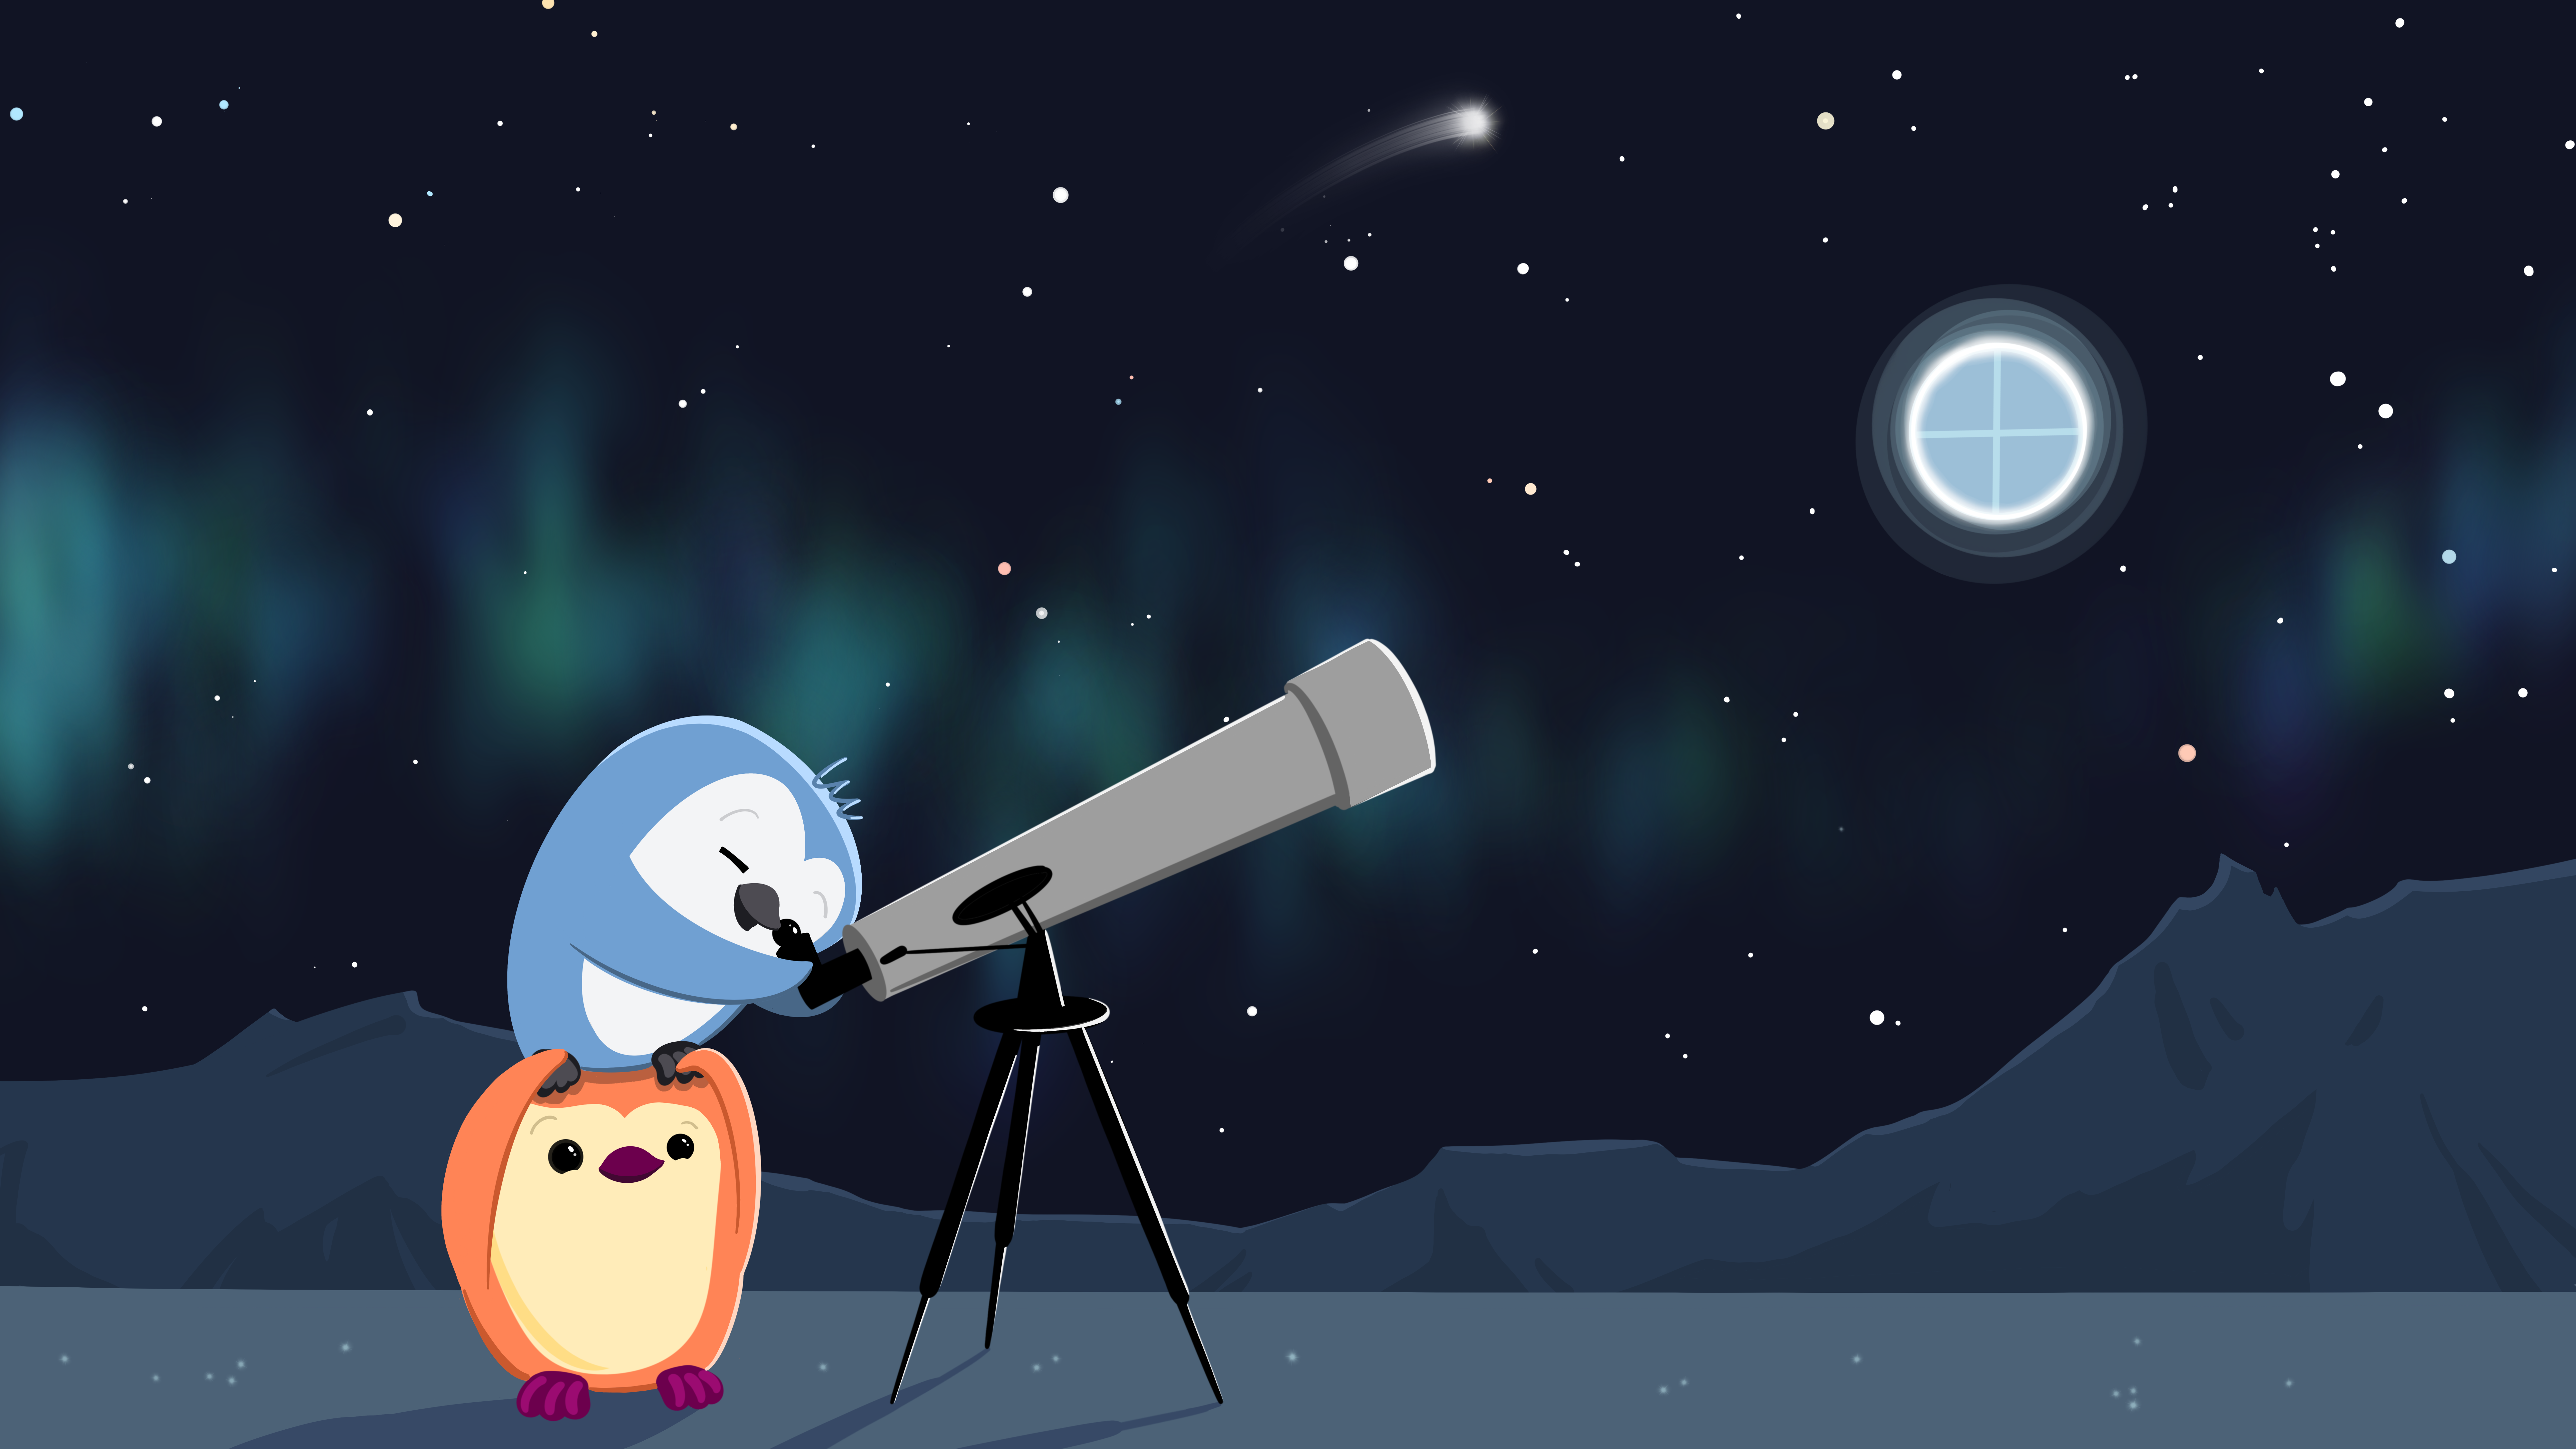 One penguin standing on another penguin's shoulders in a snowscape, looking through a telescope at a Quarto logo "moon" in the night sky.